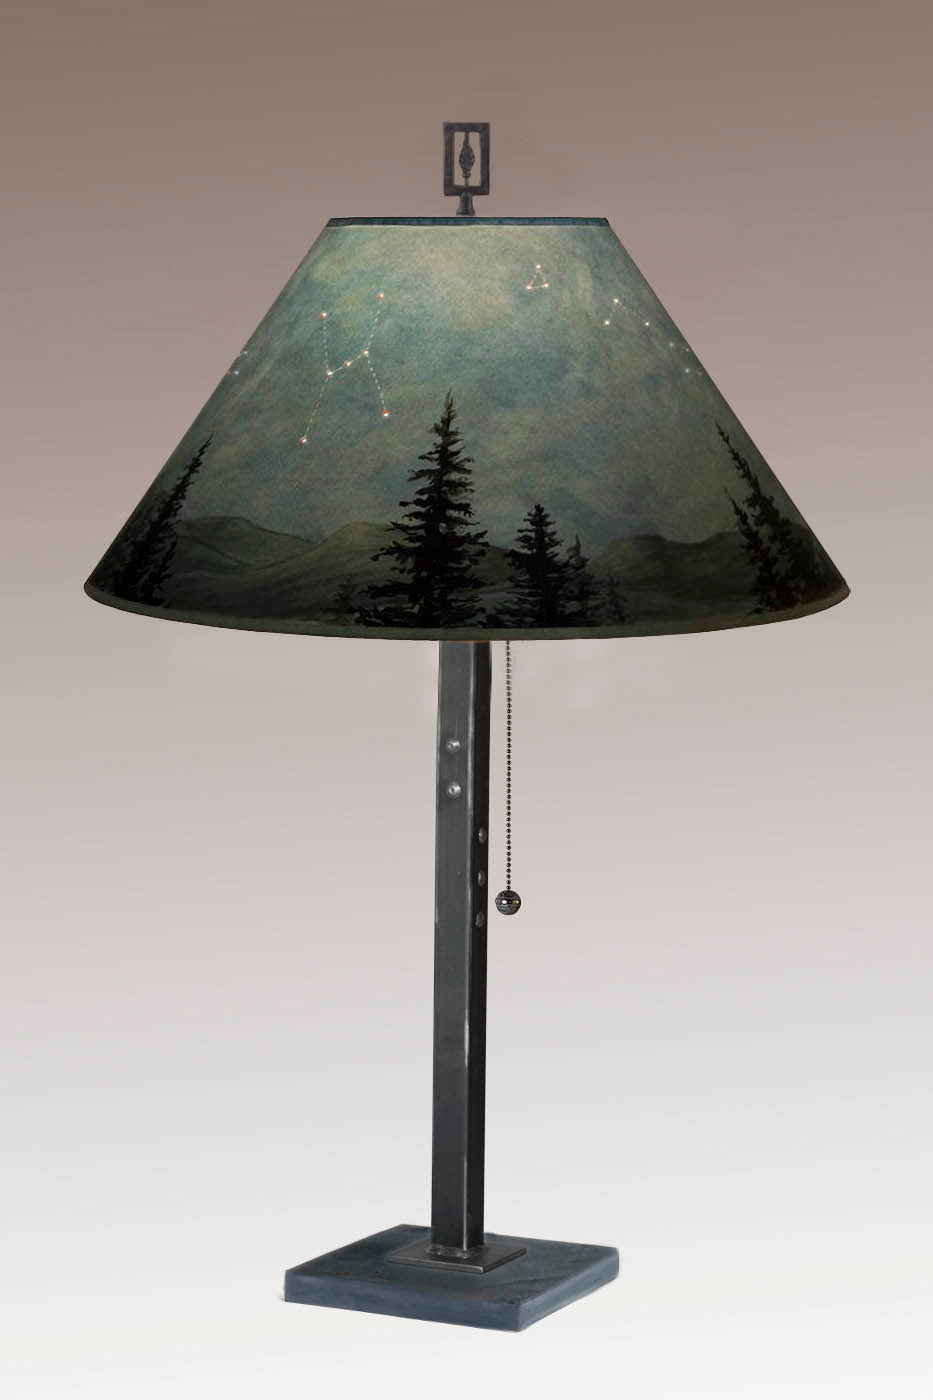 Janna Ugone & Co Table Lamp Steel Table Lamp with Large Conical Shade in Midnight Sky